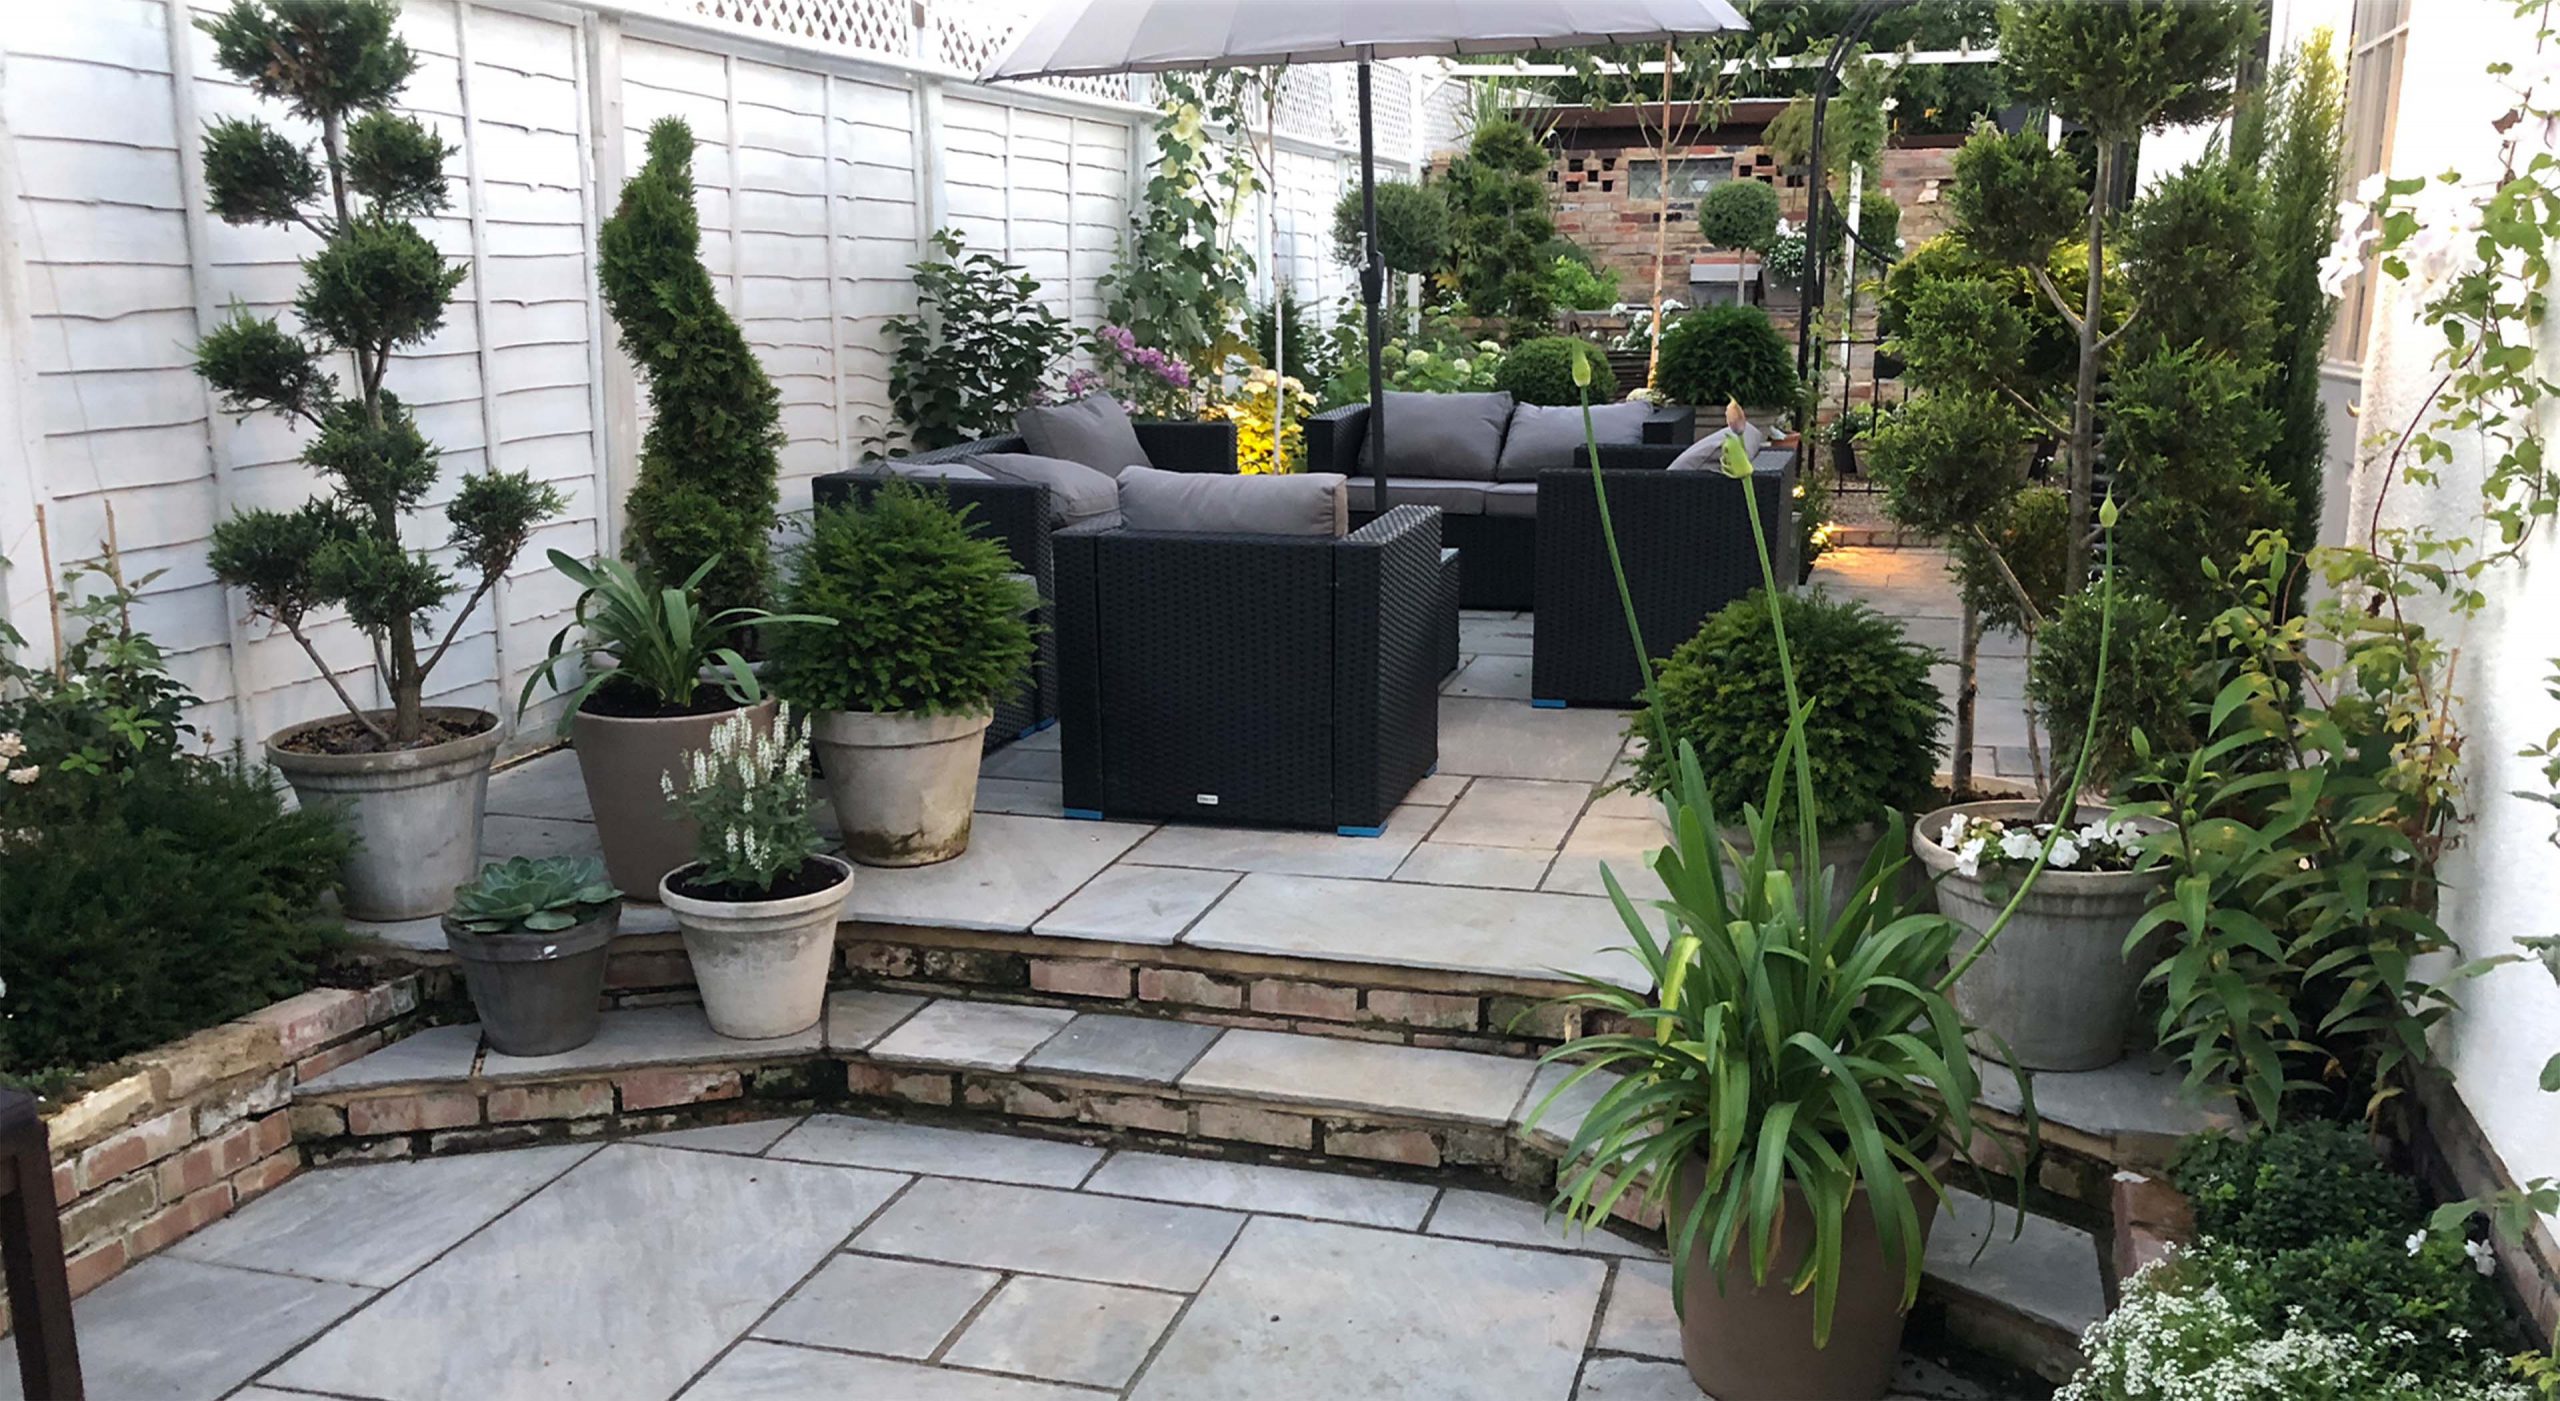 A multi-tiered tiled garden patio filled with a variety of potted plants and a seven-seater rattan furniture set designed by Willow Alexander